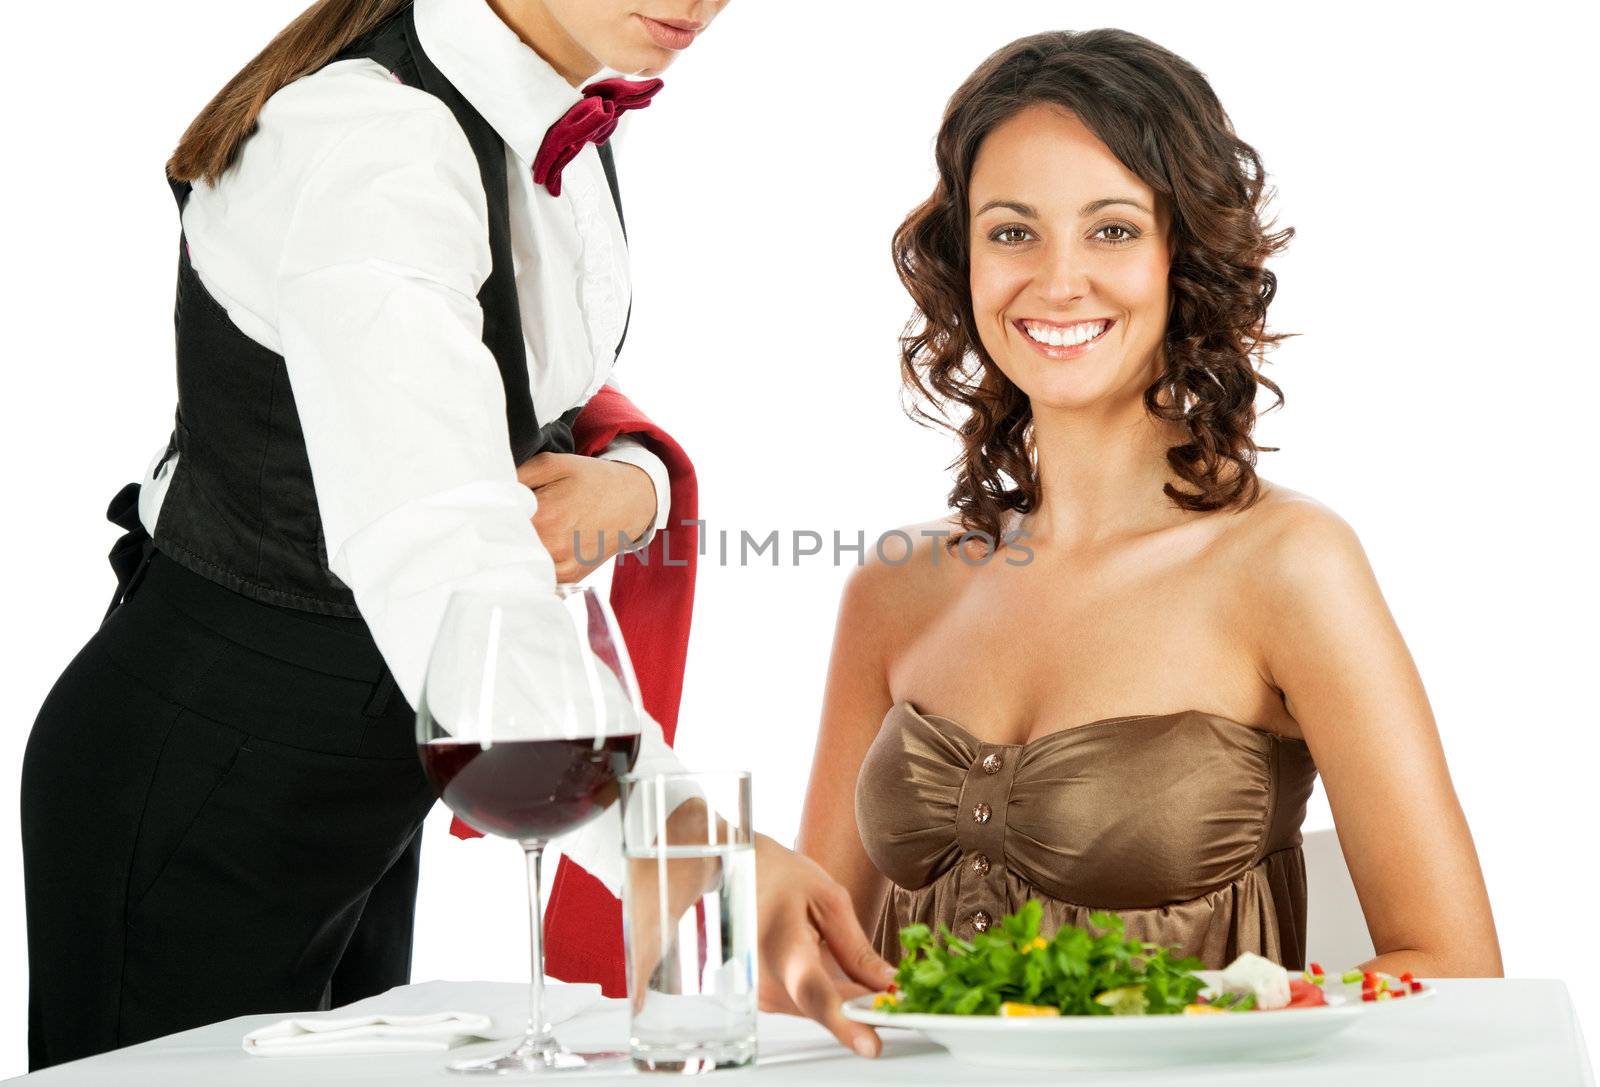 Beautiful female smiling and sitting in restaurant, being served salad by waitress